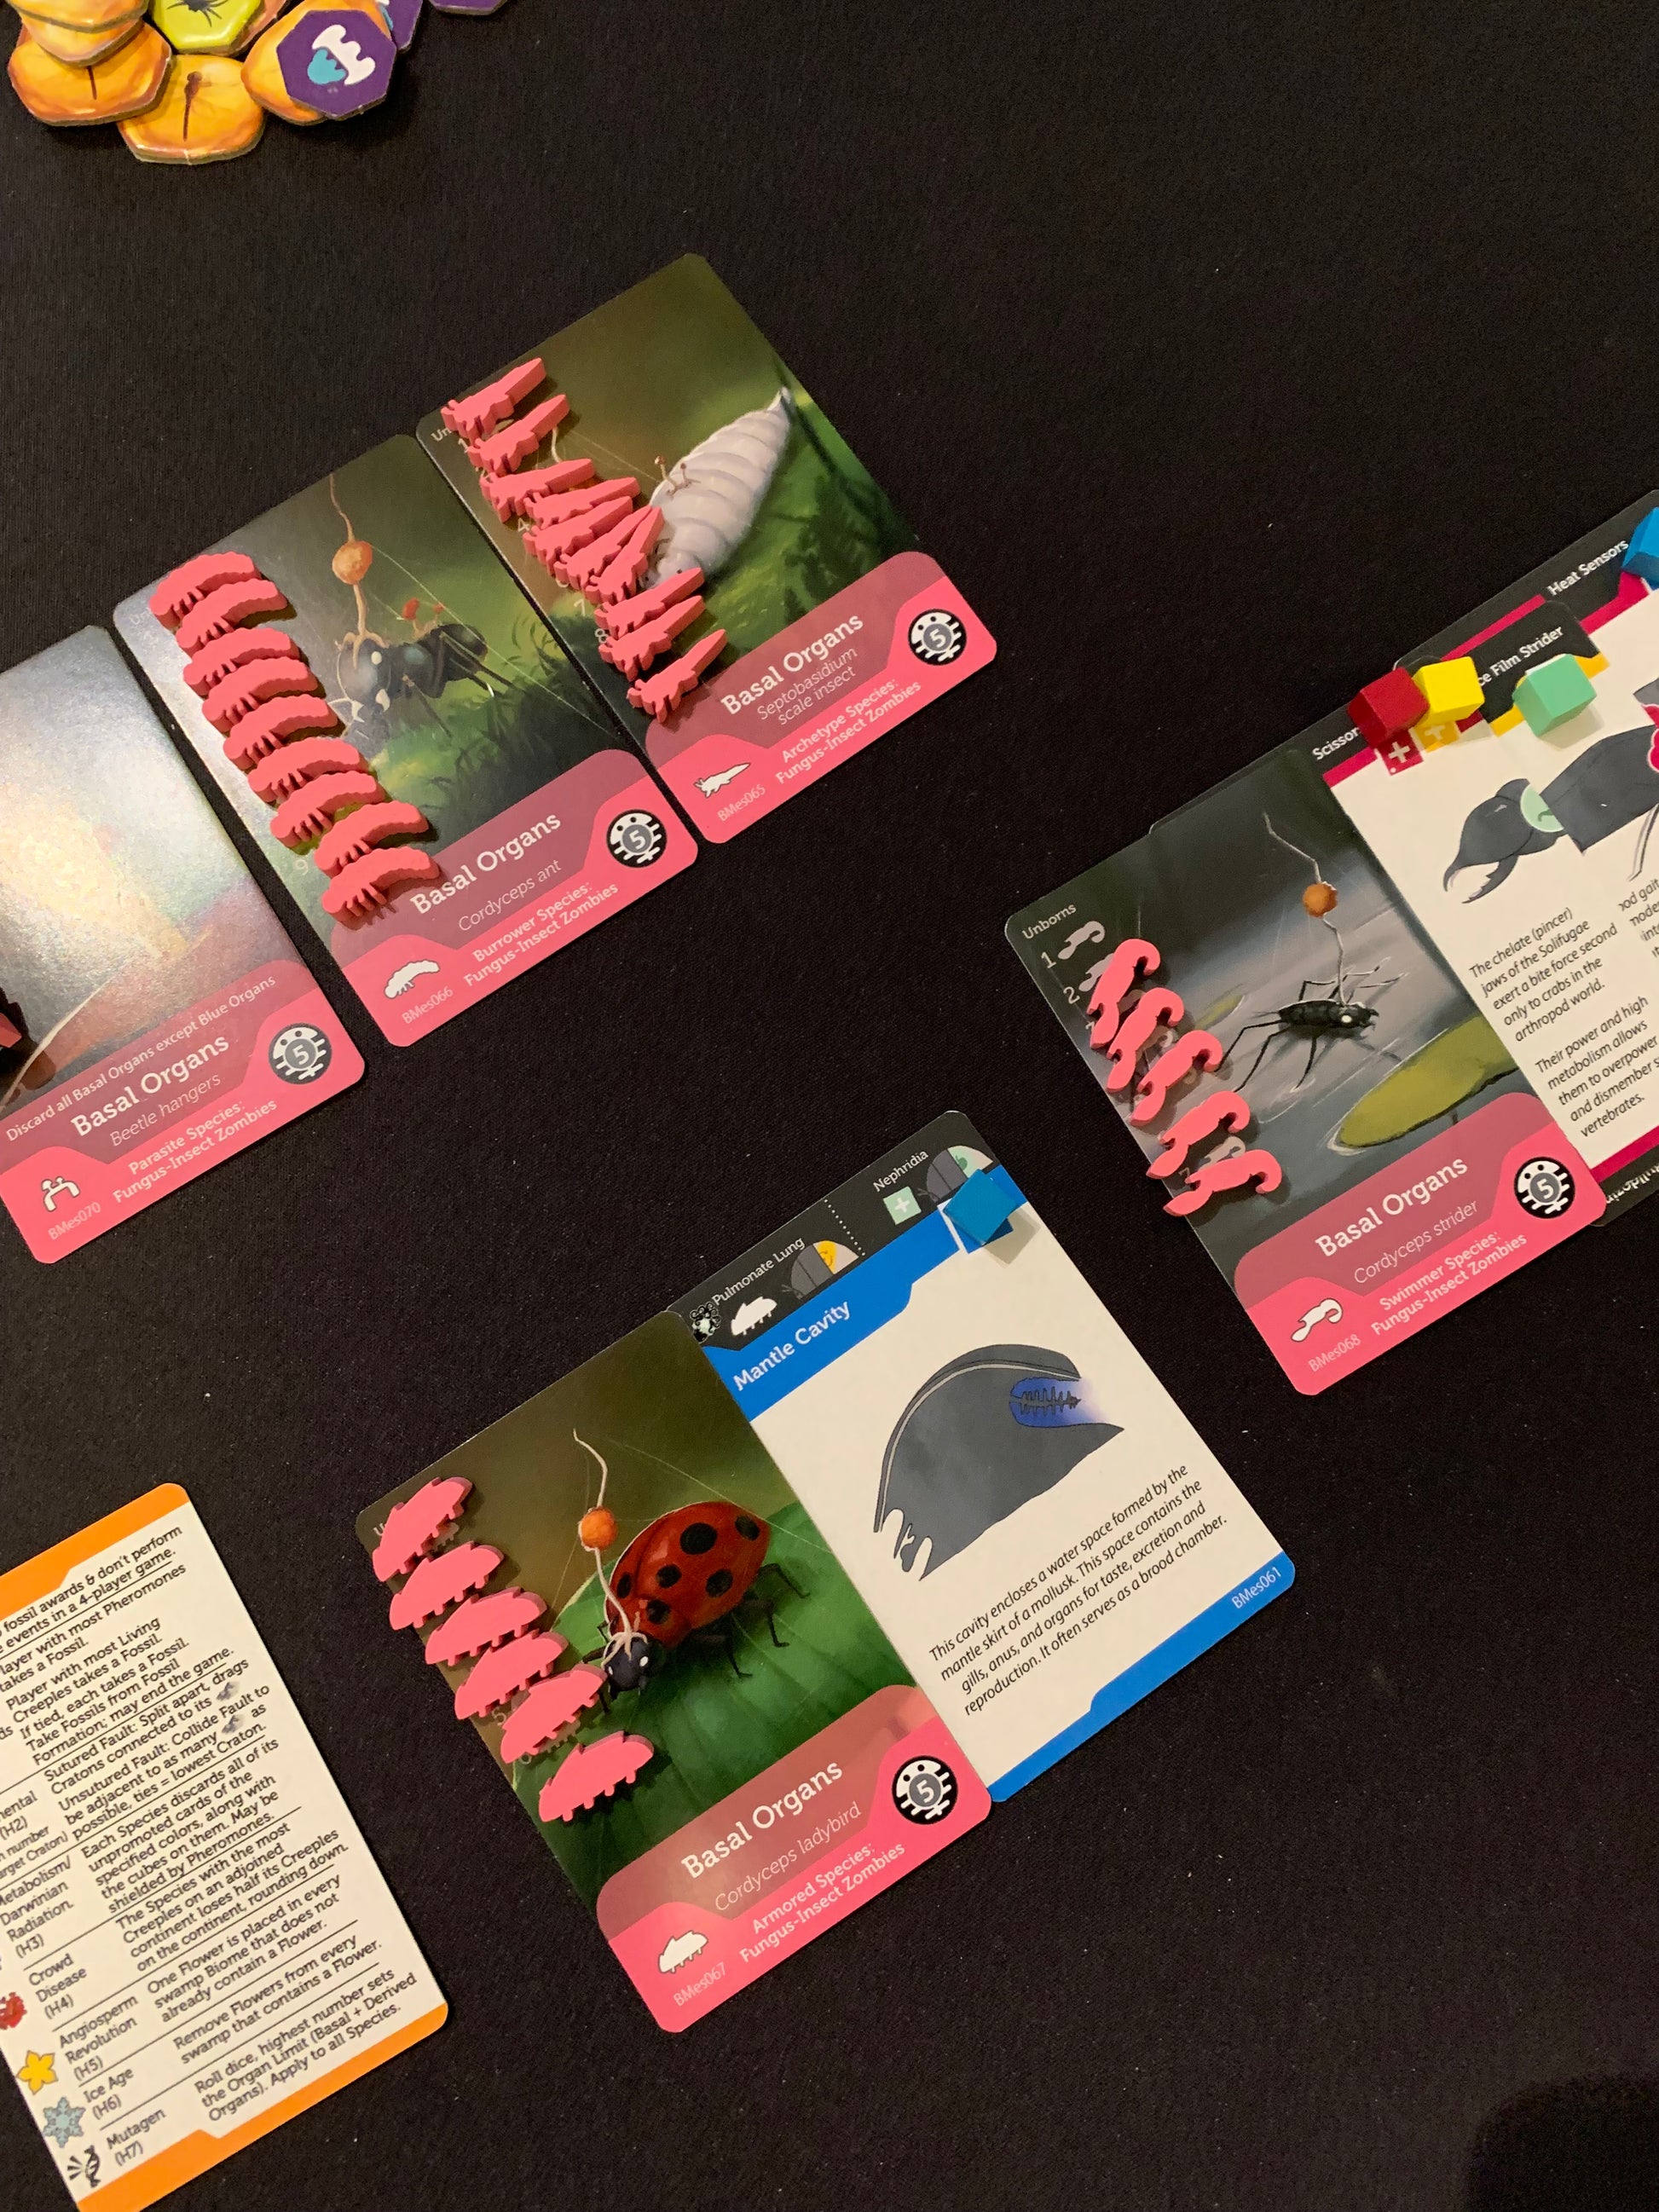 Bios: Mesofauna board game - Organ cards and fossil chits arranged in gameplay positions